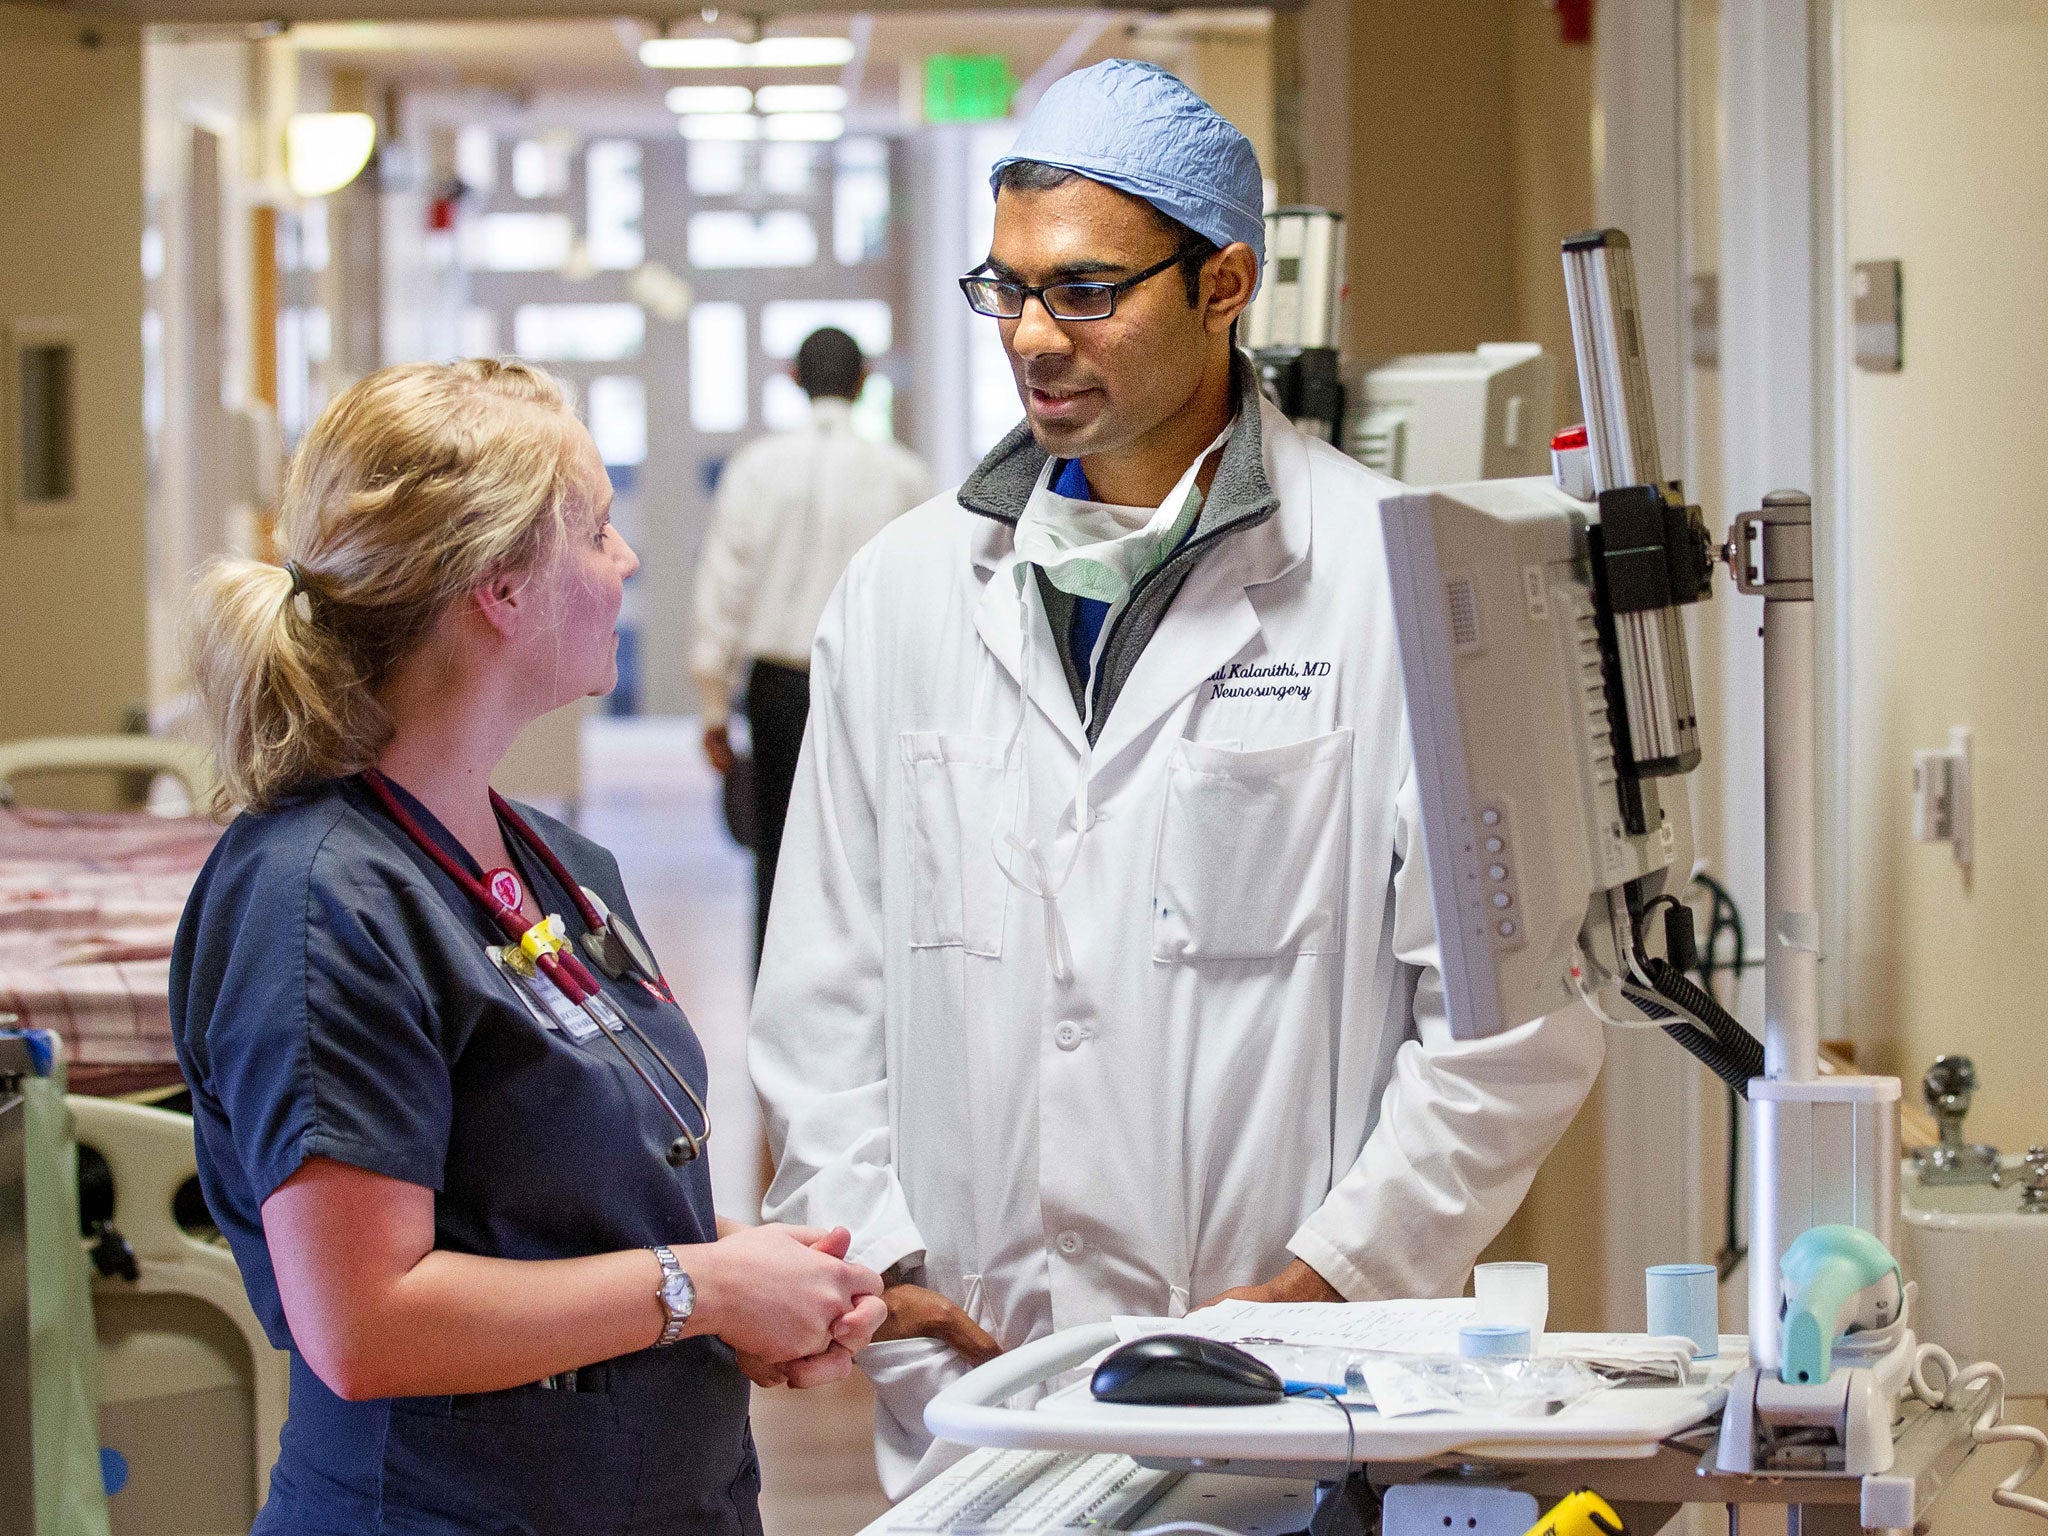 Understanding death: the late Paul Kalanithi, at the Stanford Hospital and Clinics, February 2014